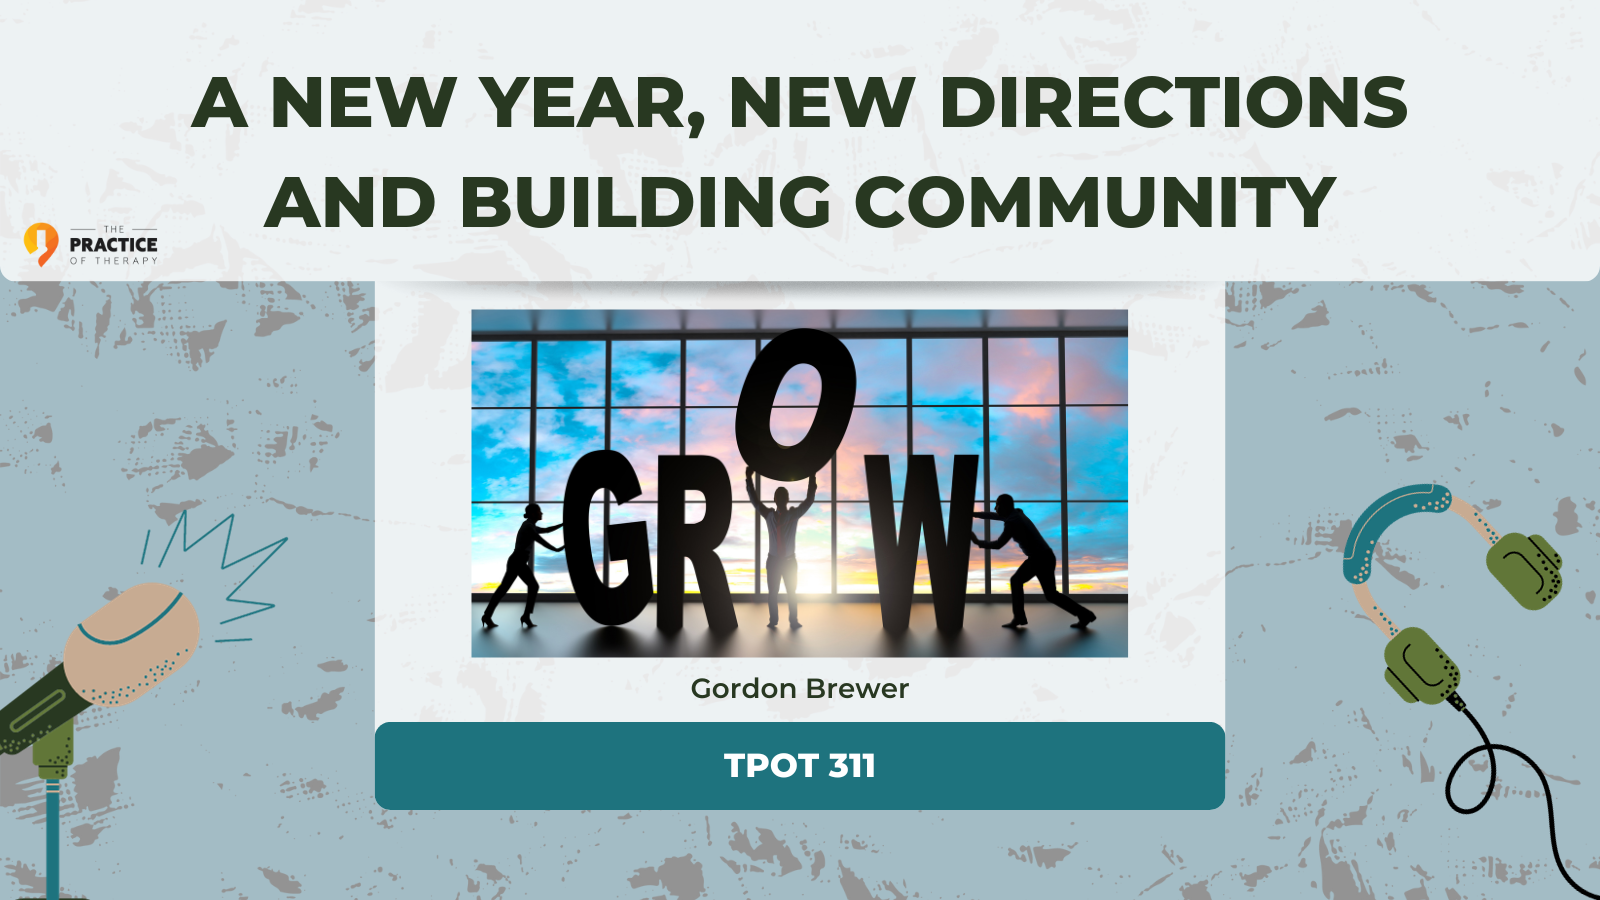 A New Year, New Directions and Building Community